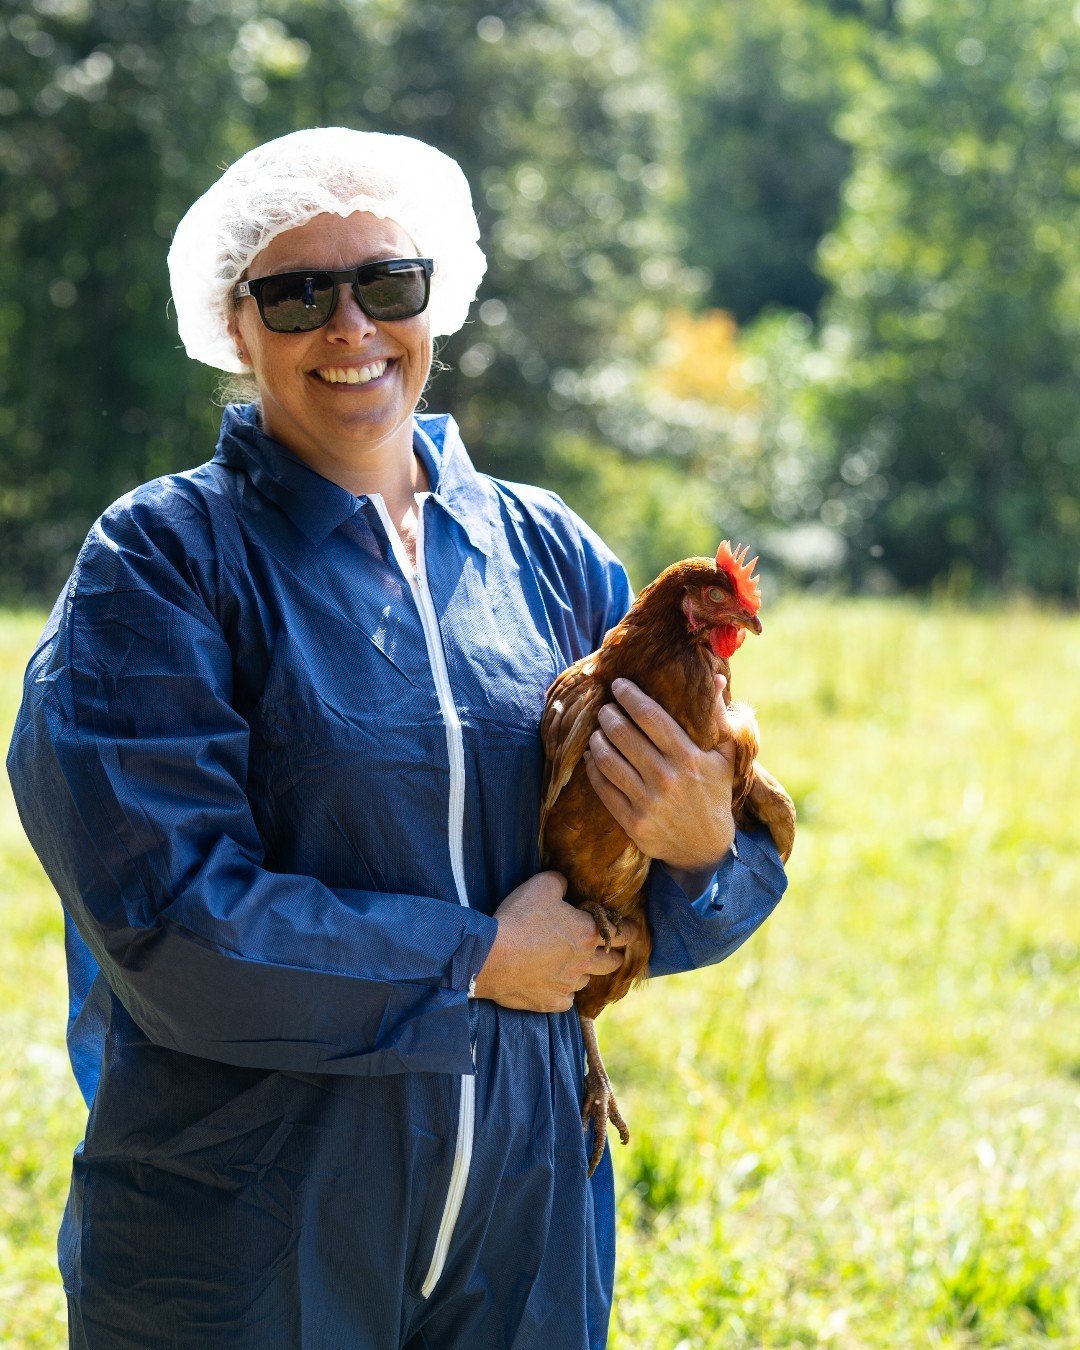 Did you know that Chickens are able to recognize and respond to individual human faces? This shows us that they can distinguish between different people! They may even exhibit signs of affection or excitement when interacting with familiar humans (on